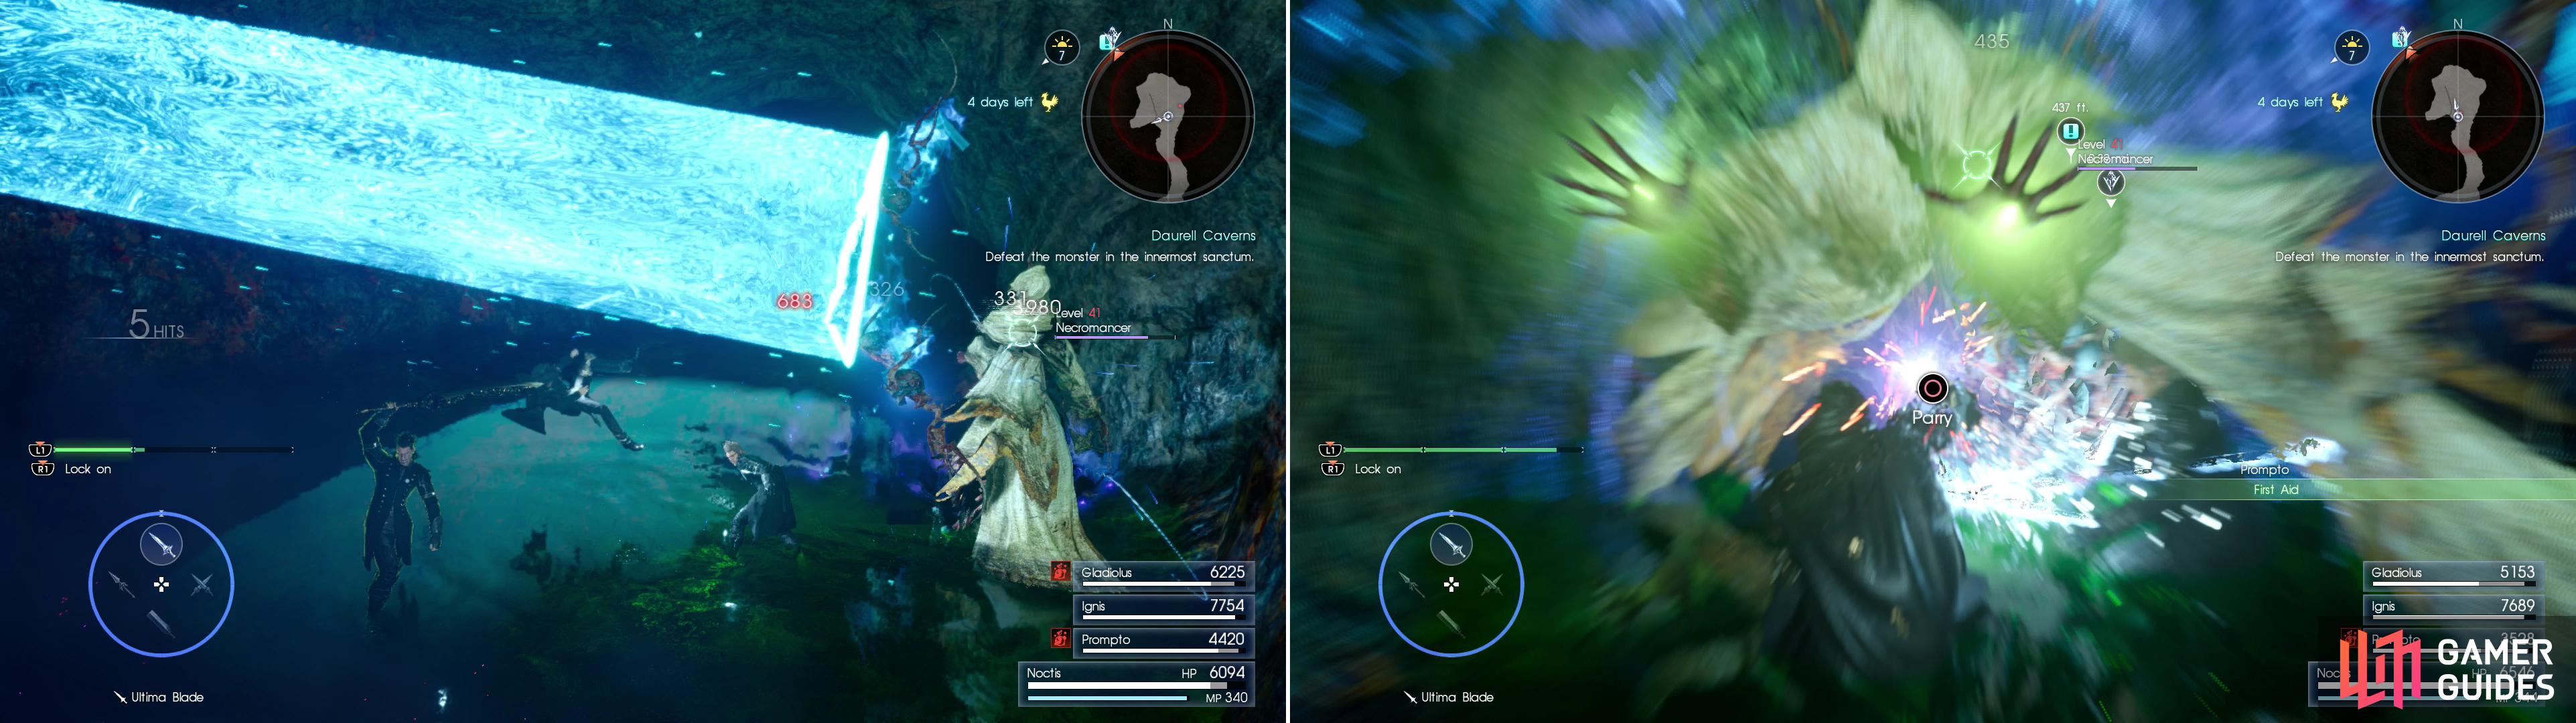 Necromancers can do great damage, and inflict petrification with their triangle-beam attacks (left). They’ll also attempt to grapple Noctis and drain his Magic Points (right).